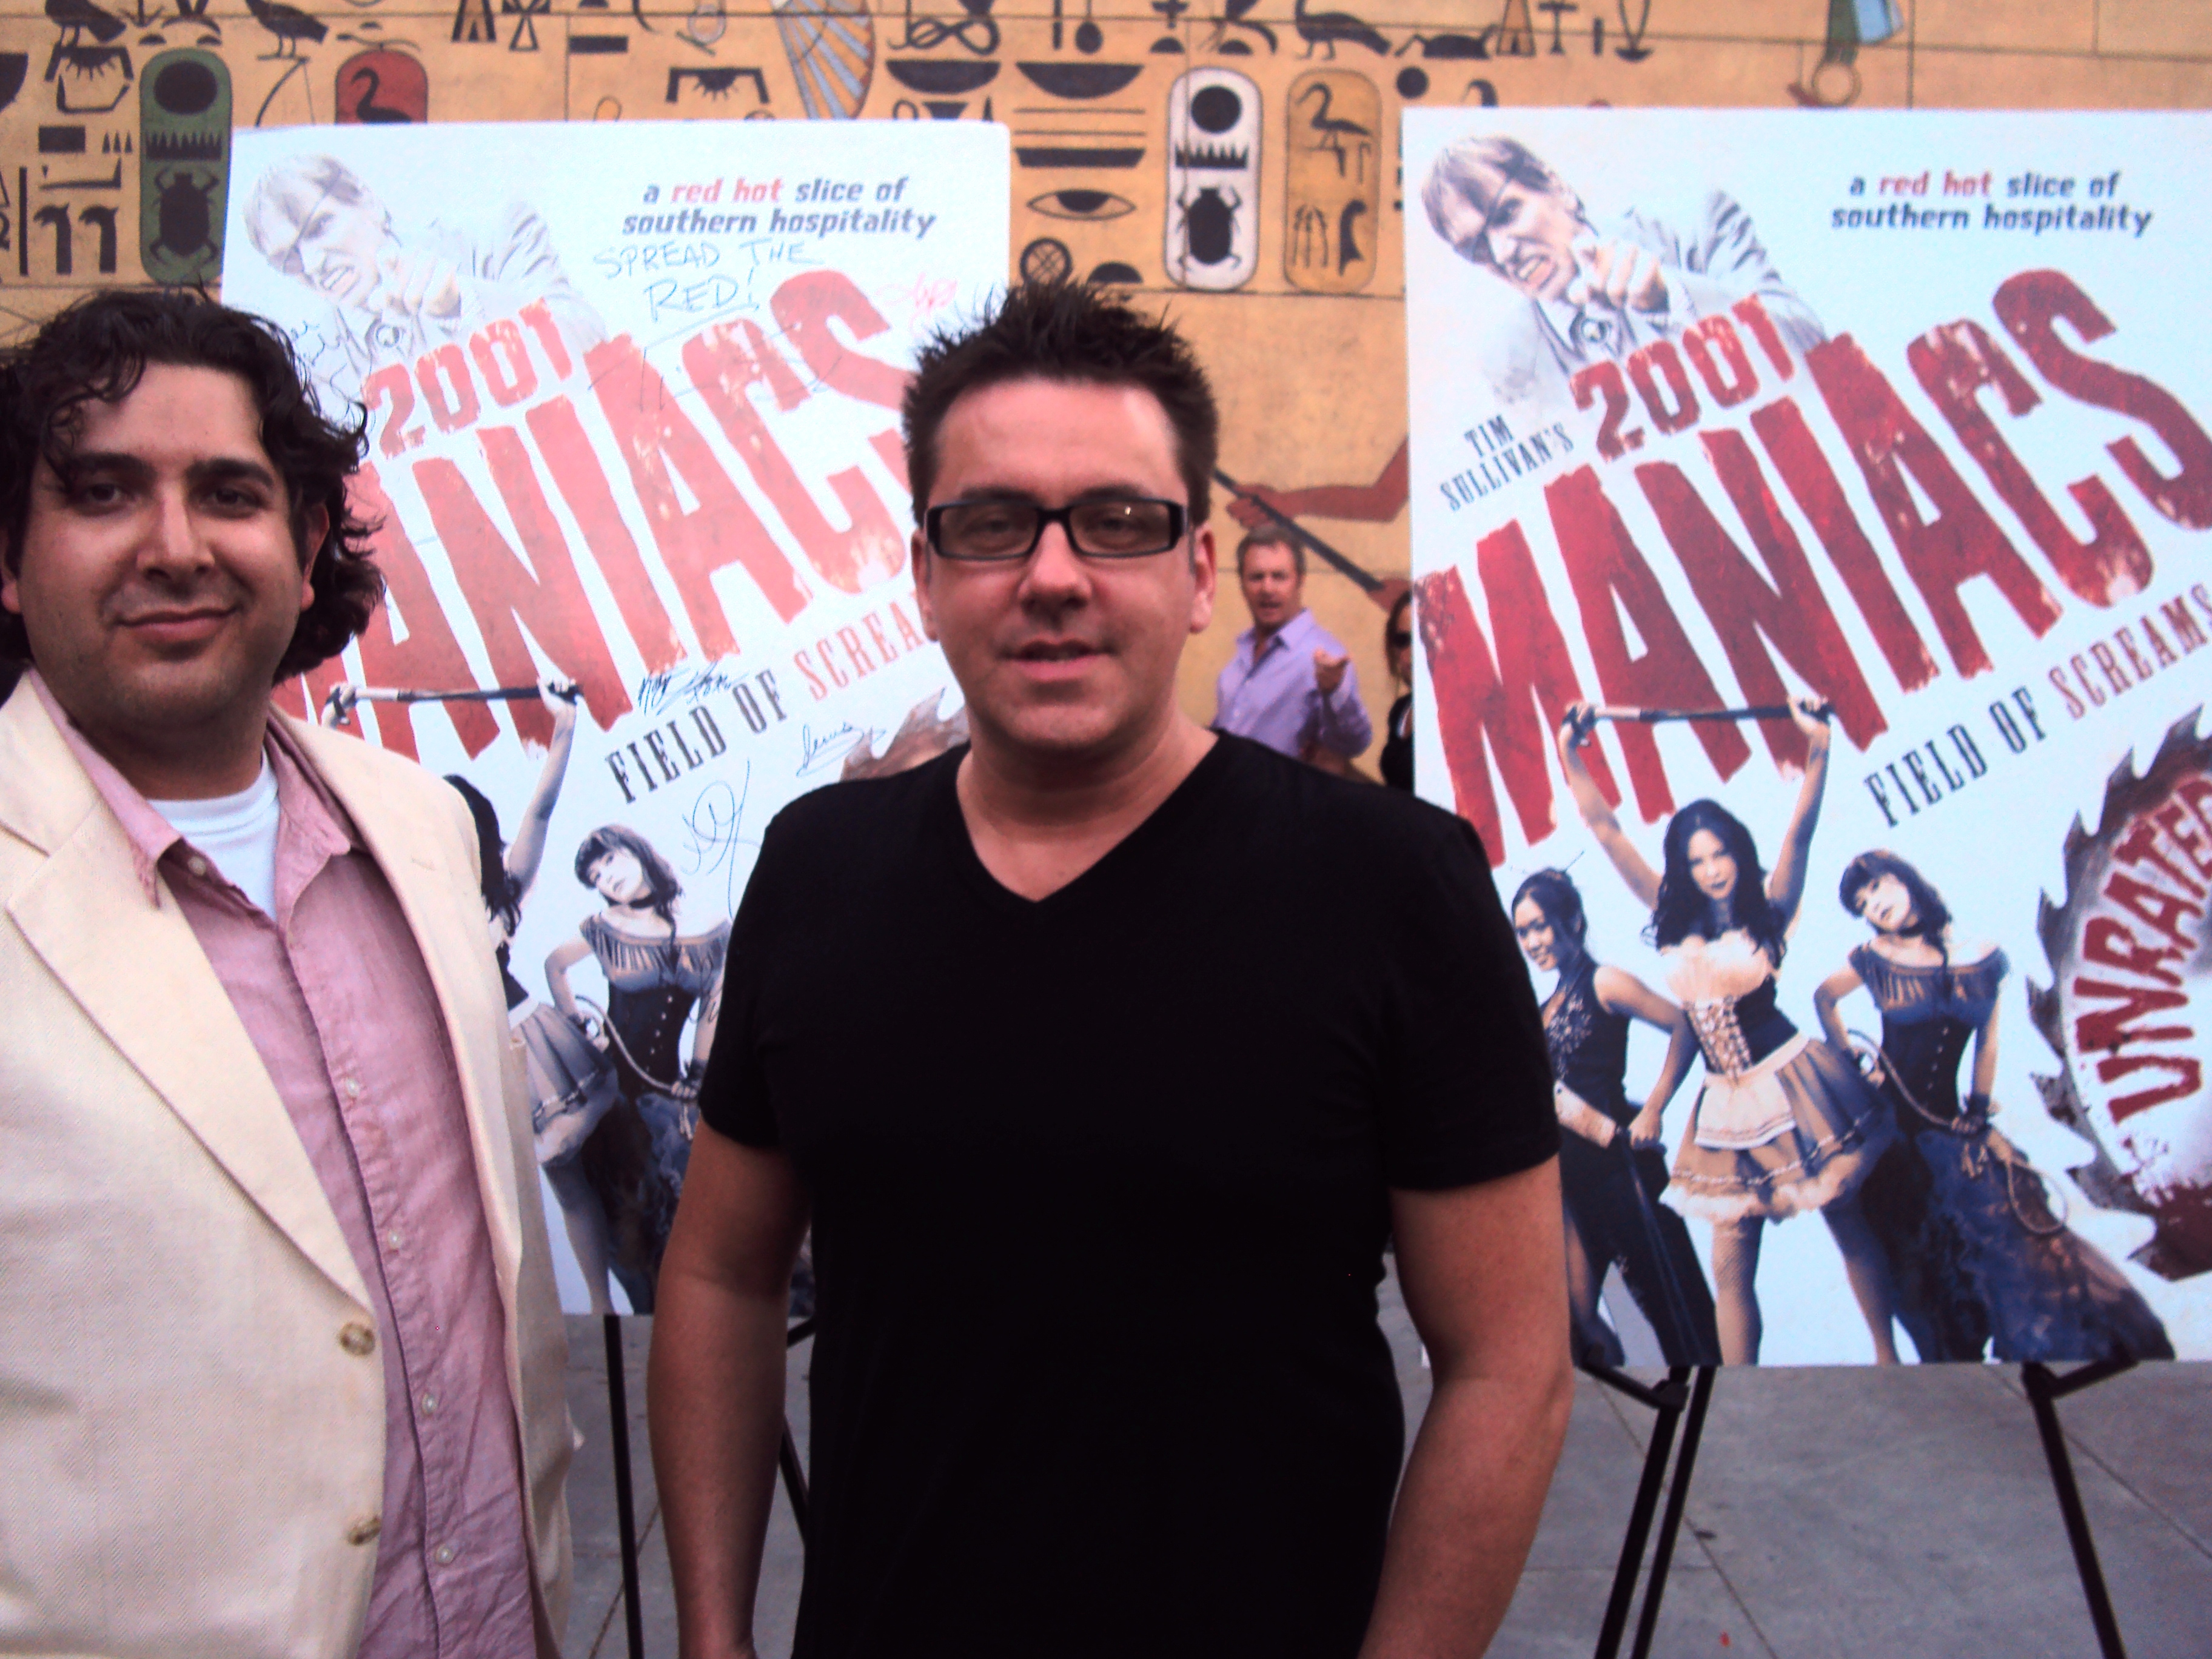 John Crockett and Brian McCulley on the red carpet at the premiere of 2001 Maniacs Field of Screams.